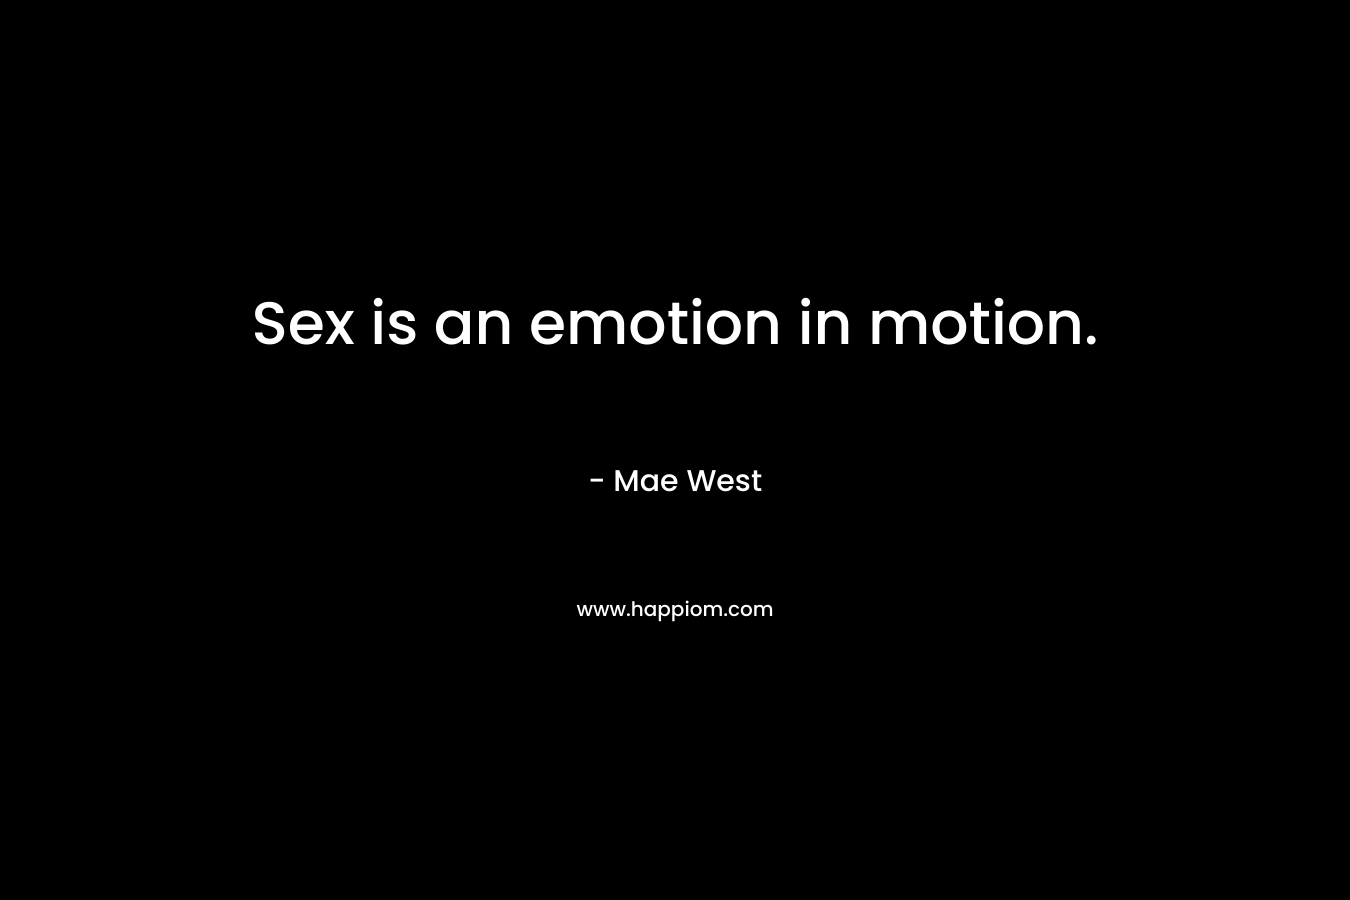 Sex is an emotion in motion. – Mae West